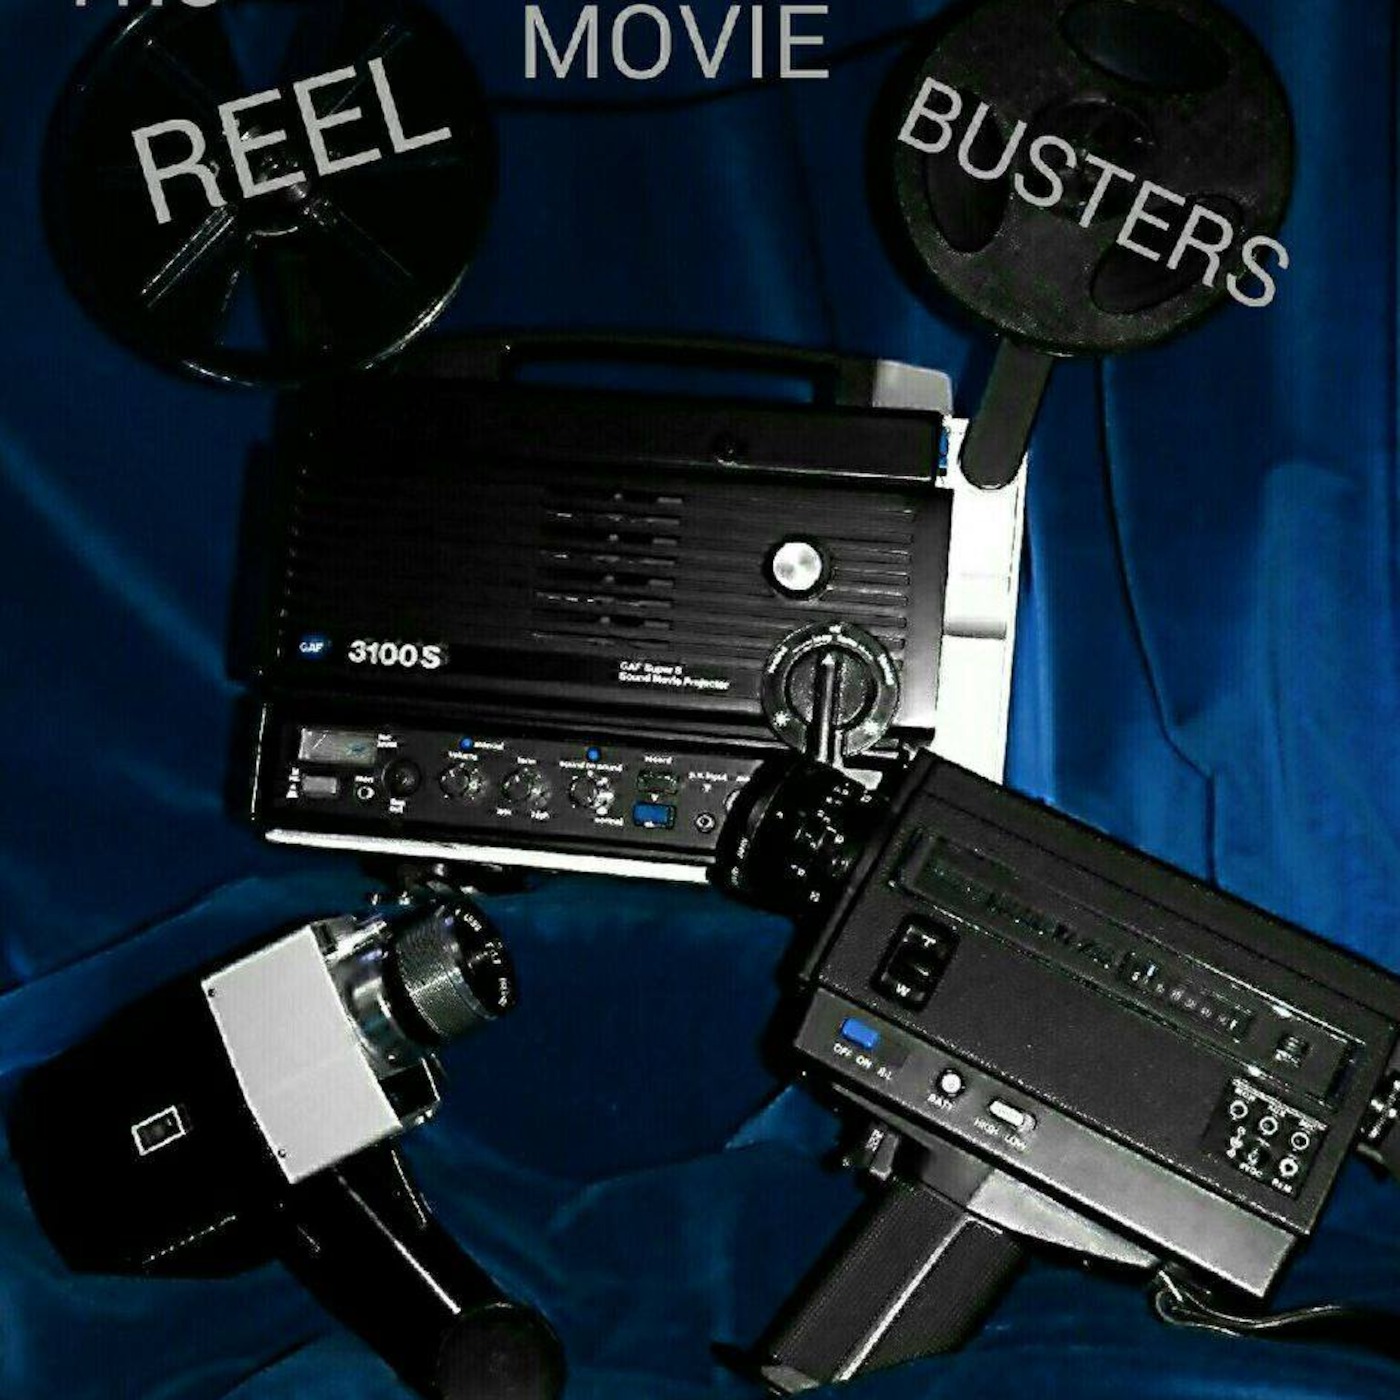 Reel Movie Busters' Podcast